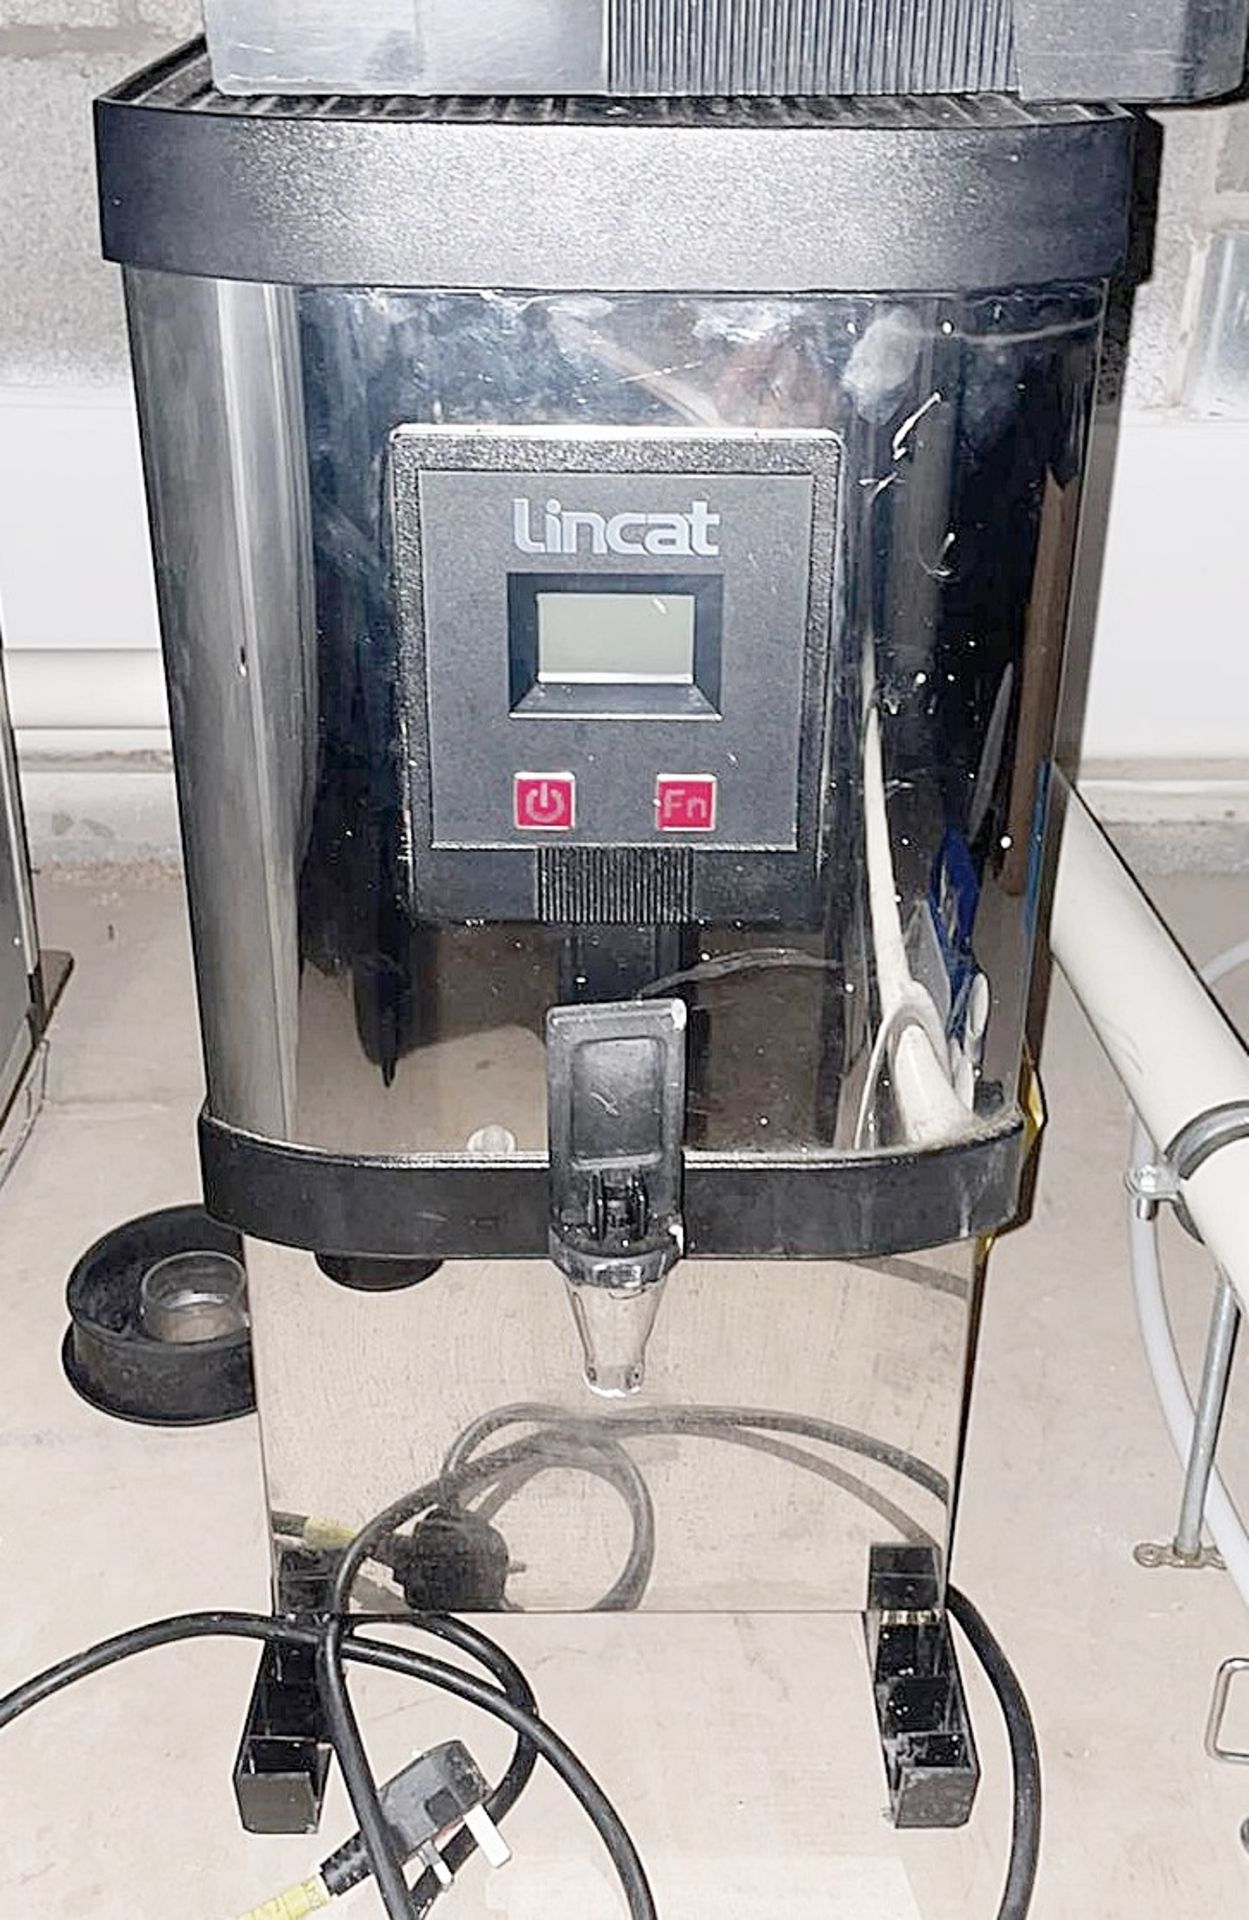 1 x Lincat Automatic Water Boiler - CL674 - Location: Telford, TF3 Collections: This item is to be